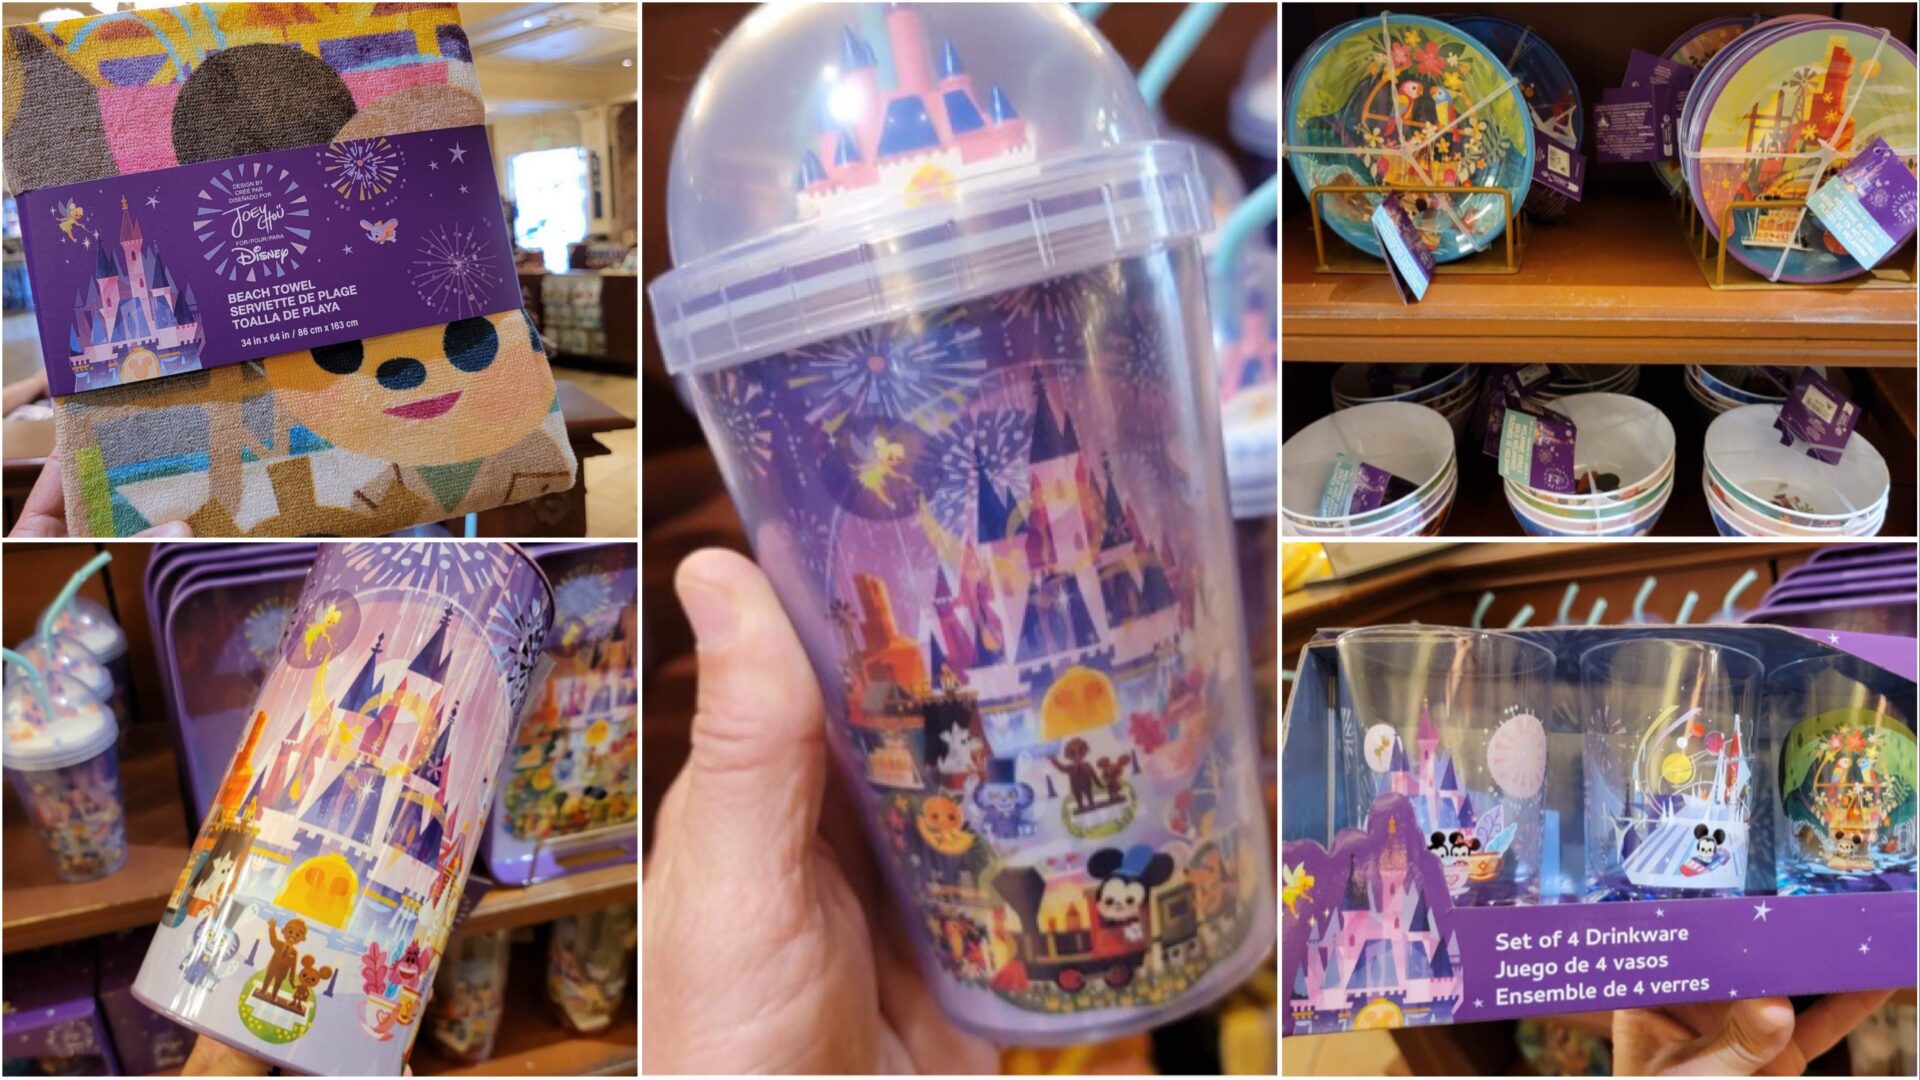 New Joey Chou Disney Collection Available At Magic Kingdom!